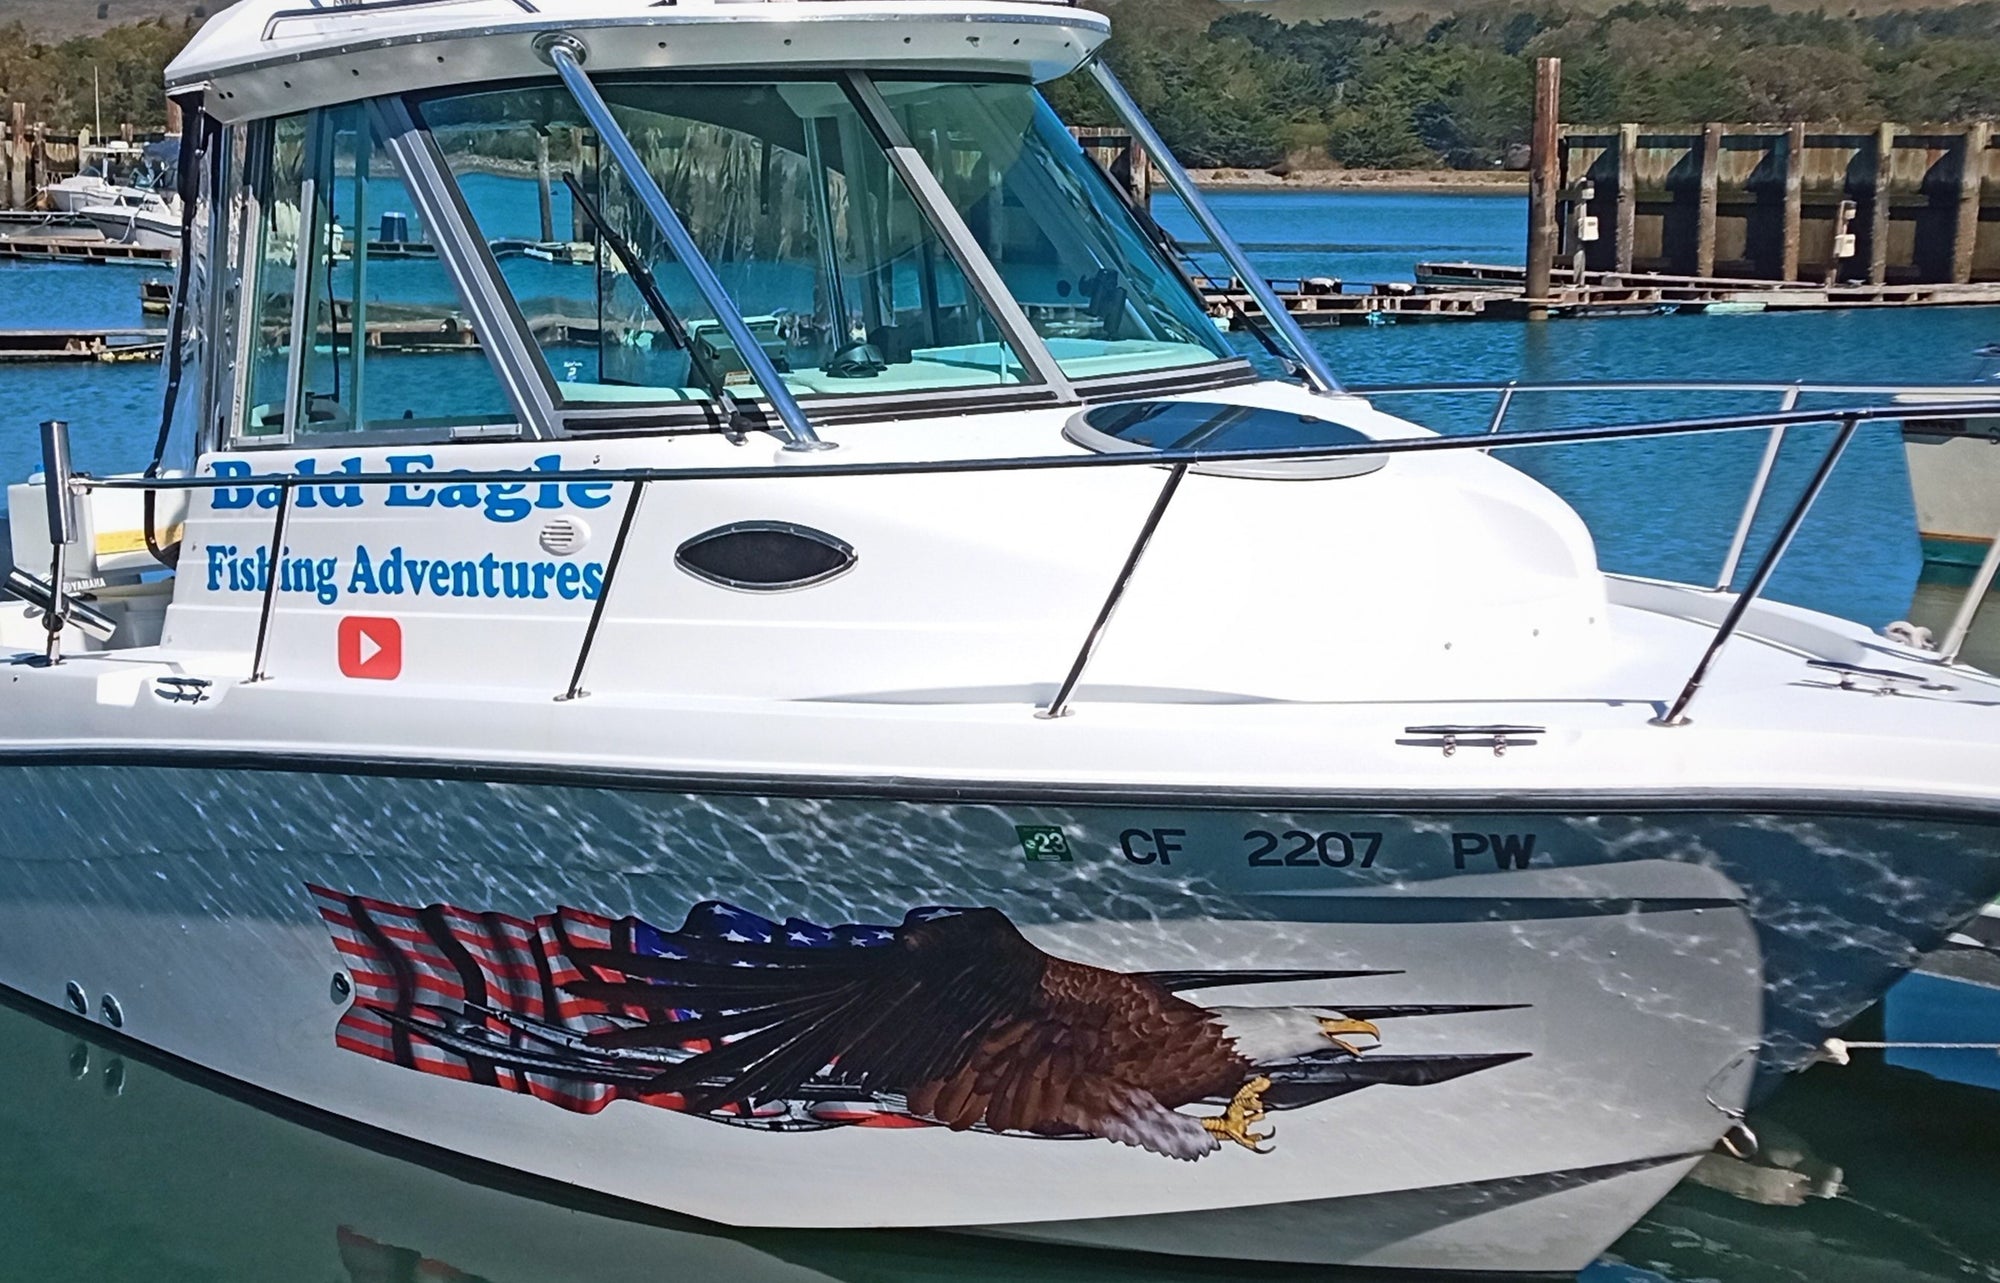 American eagle decal on fishing boat